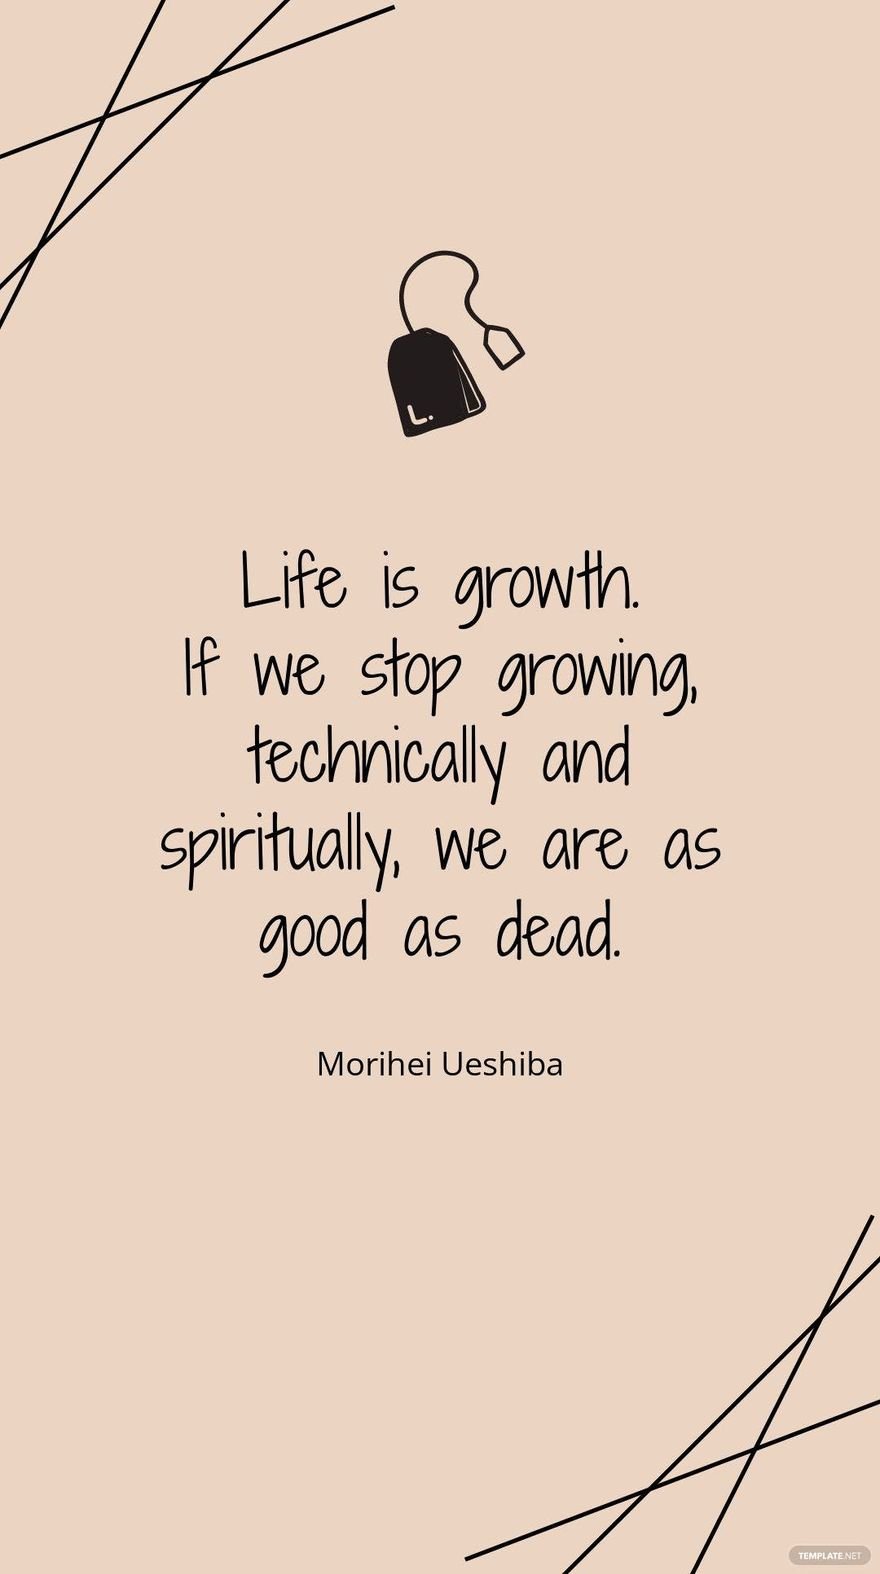 Morihei Ueshiba - "Life is growth. If we stop growing, technically and spiritually, we are as good as dead."